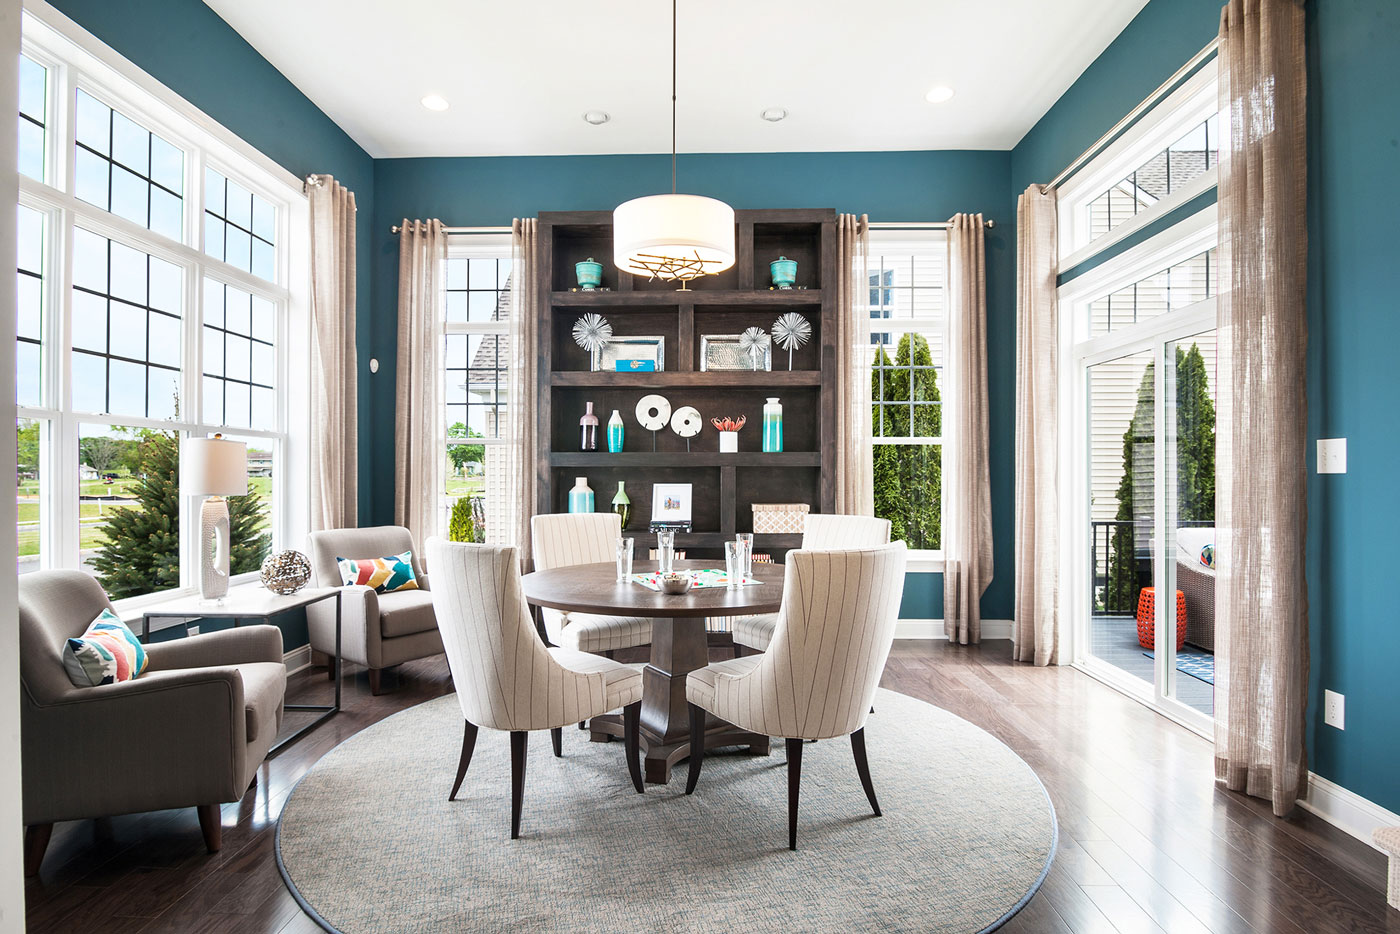 Model home flex space with dramatic turquoise accent walls and dark wood built ins, in Glassboro, New Jersey.